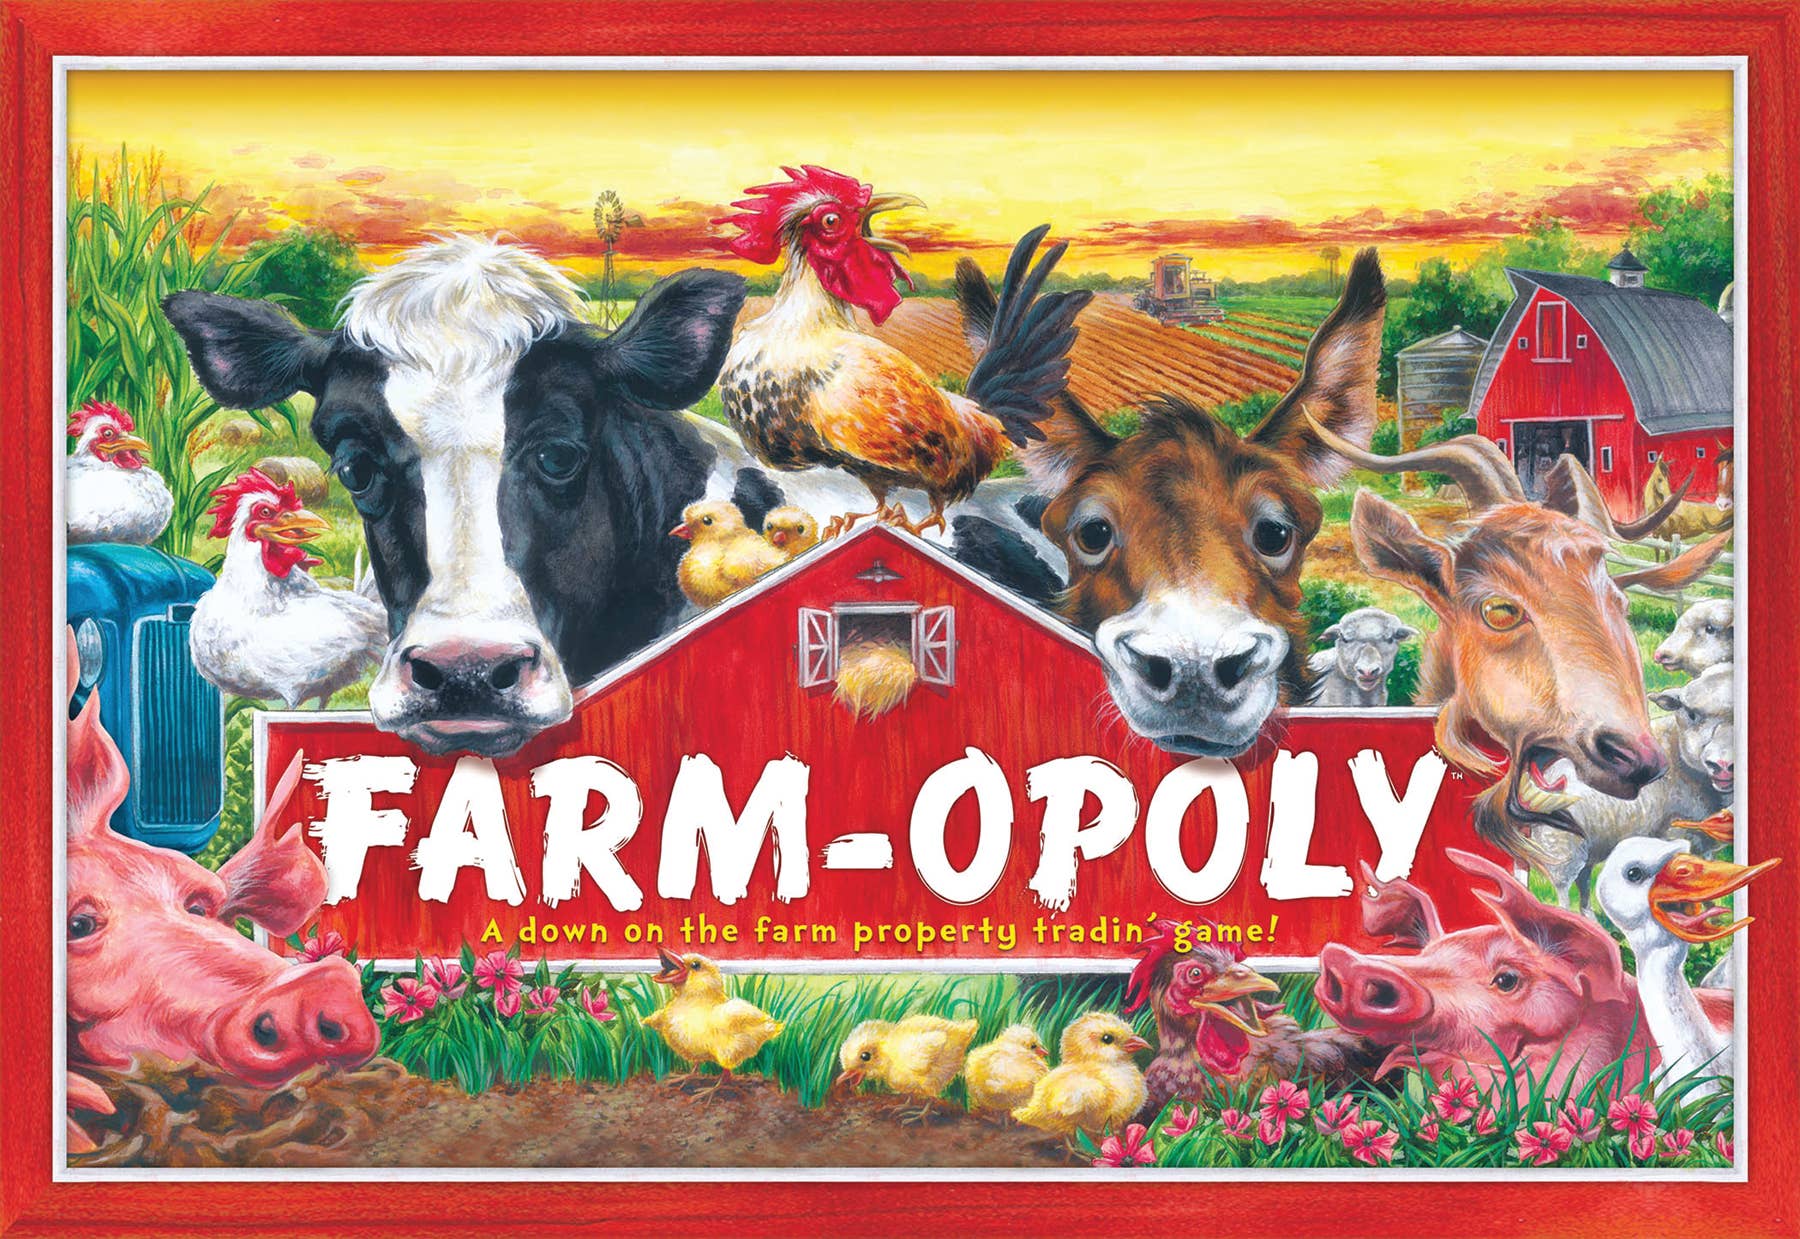 Farm-Opoly, A down on the farm property tradin' game! Game for farmers and ranchers.